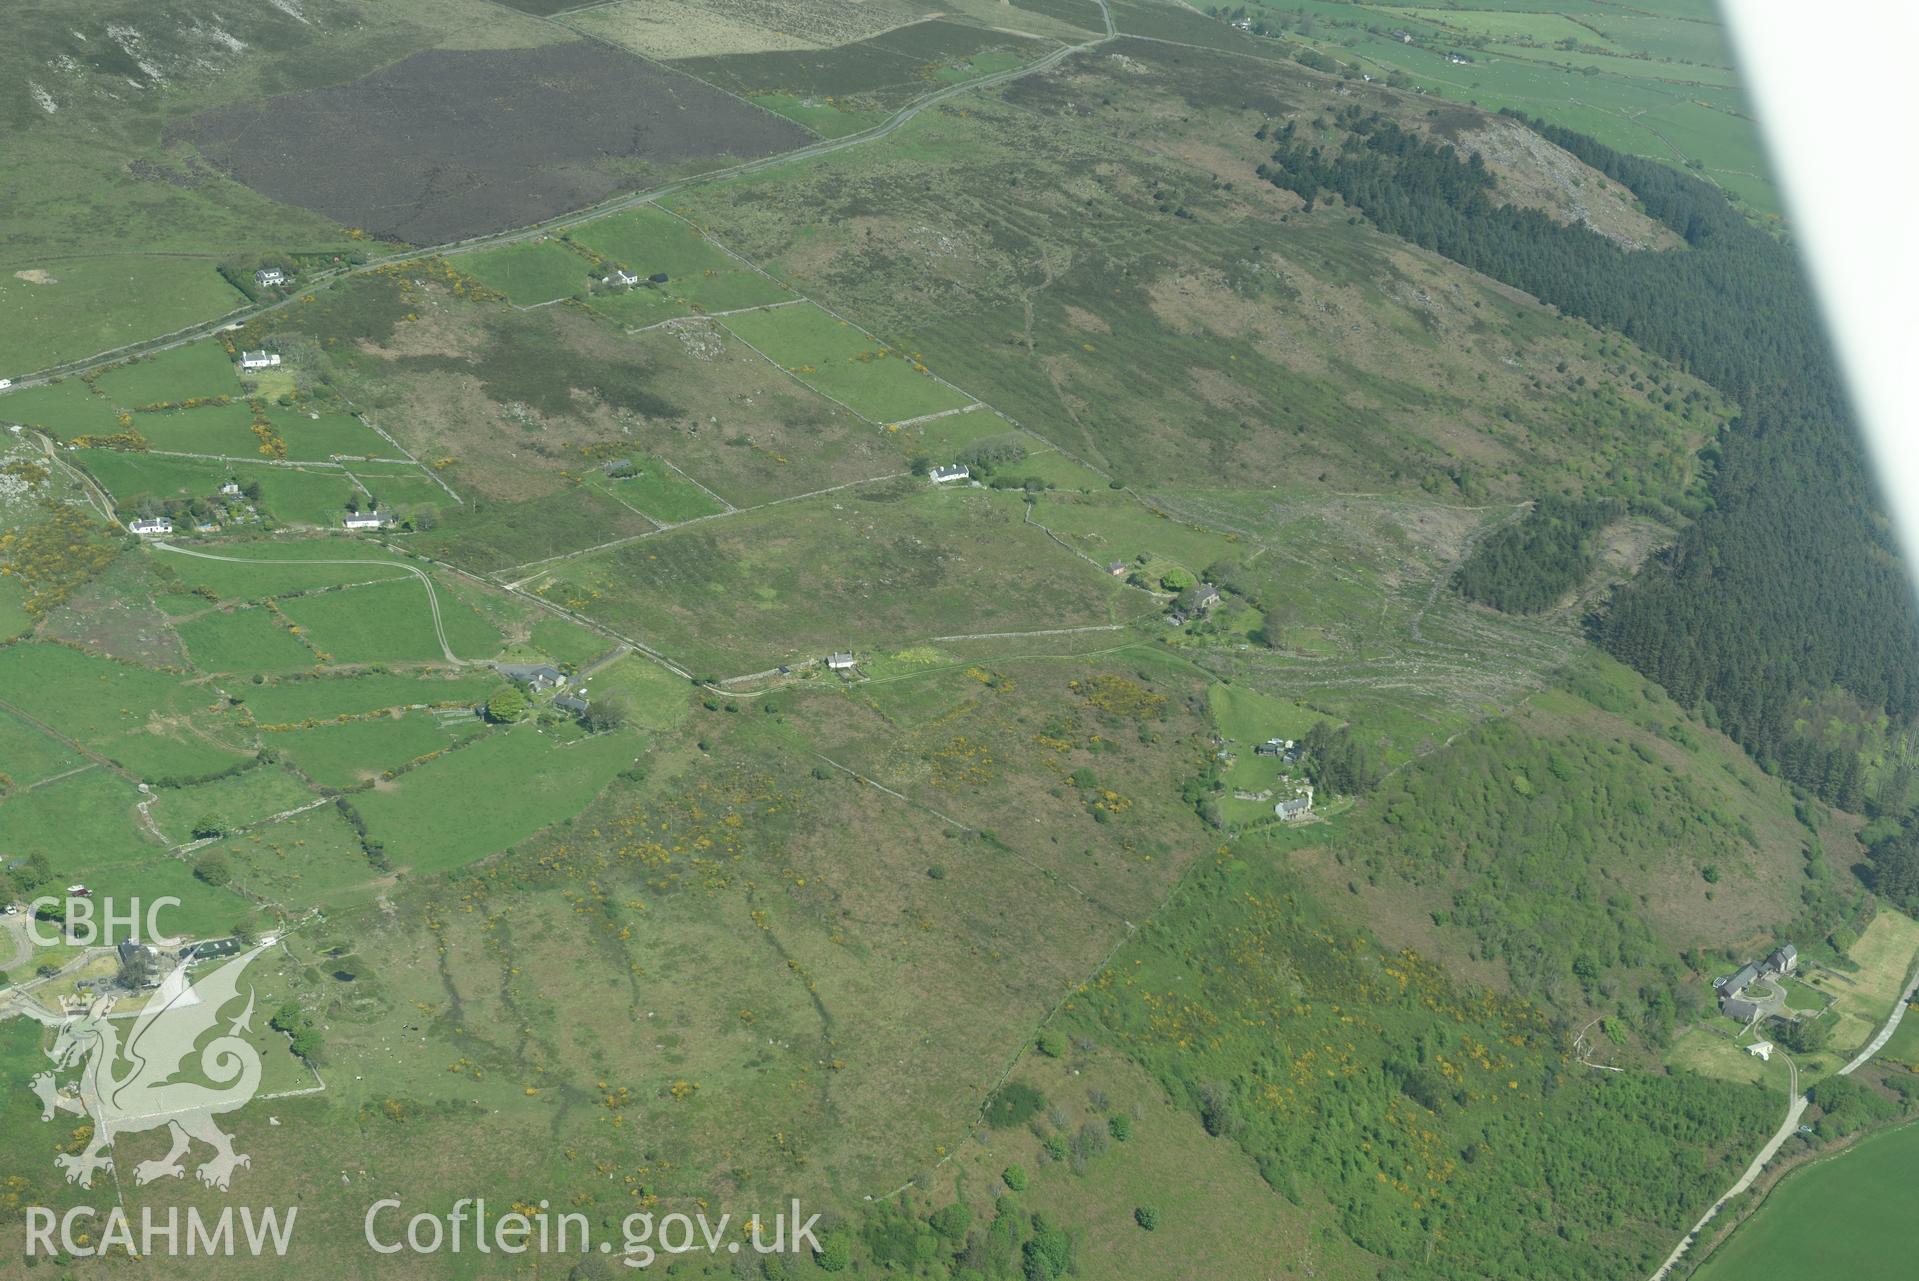 Aerial photography of Rhiw burial chamber taken on 3rd May 2017.  Baseline aerial reconnaissance survey for the CHERISH Project. ? Crown: CHERISH PROJECT 2017. Produced with EU funds through the Ireland Wales Co-operation Programme 2014-2020. All materia